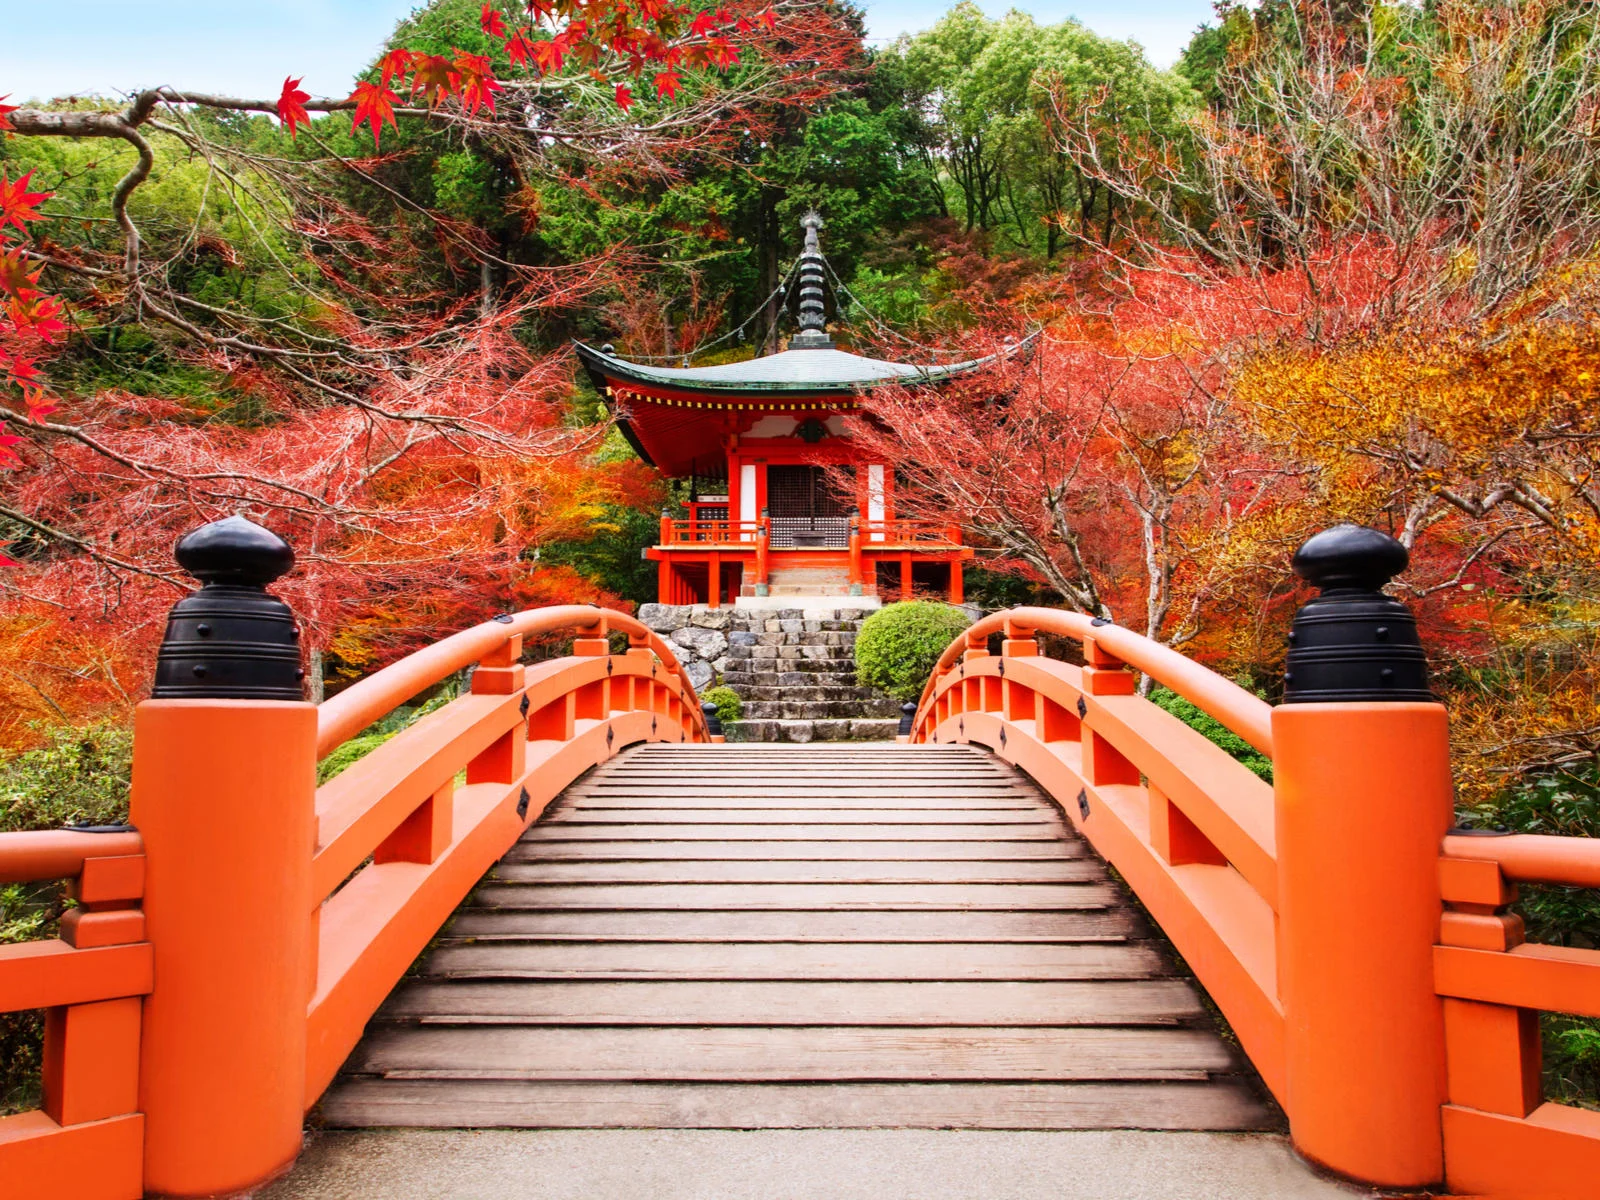 During the best time to visit Tokyo, a photo of the walkway to the Kyoto Daigoji temple